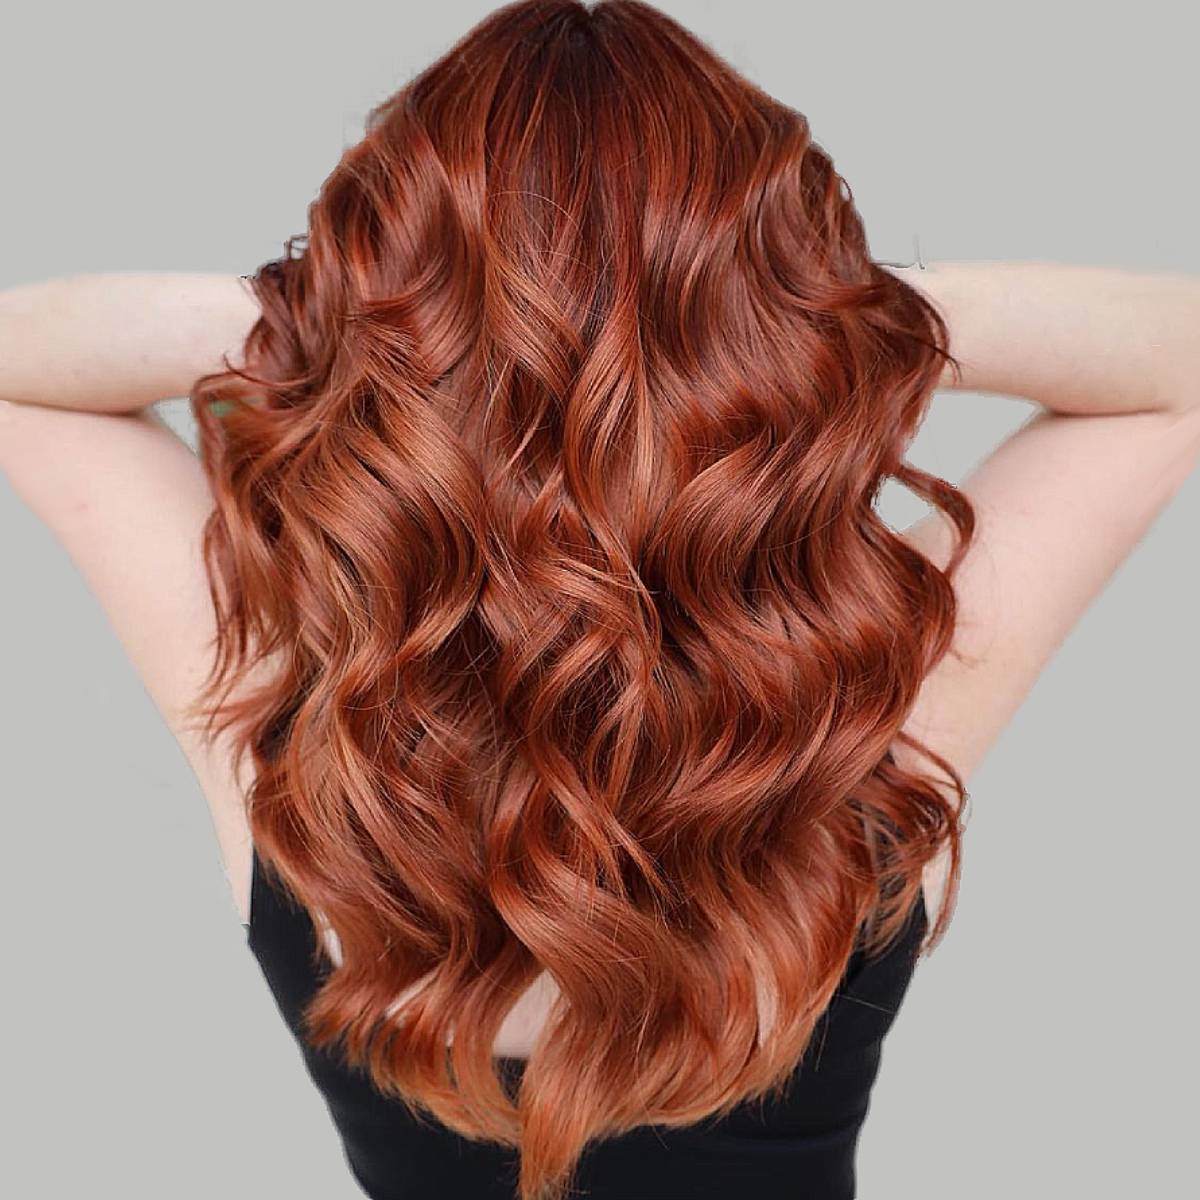 10 Red Hair Color Ideas To Try This Summer